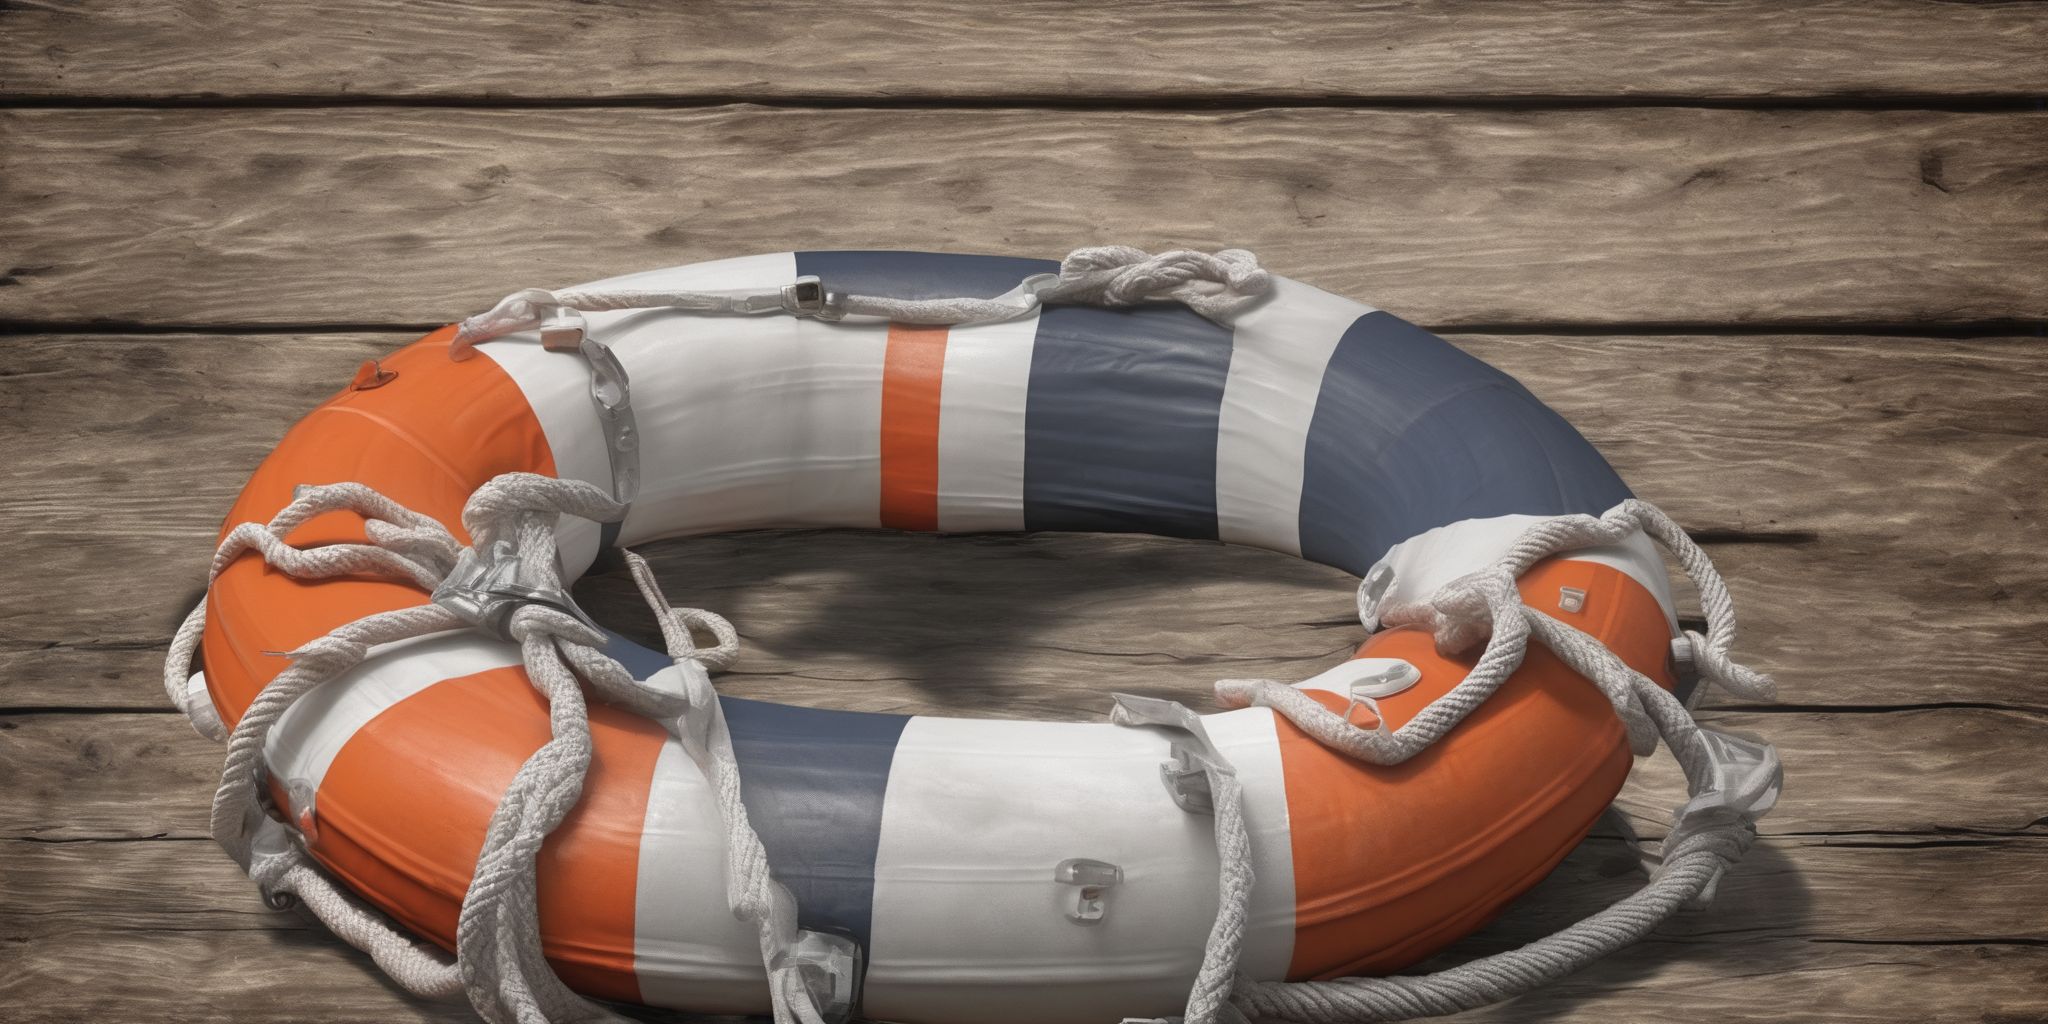 Life preserver  in realistic, photographic style